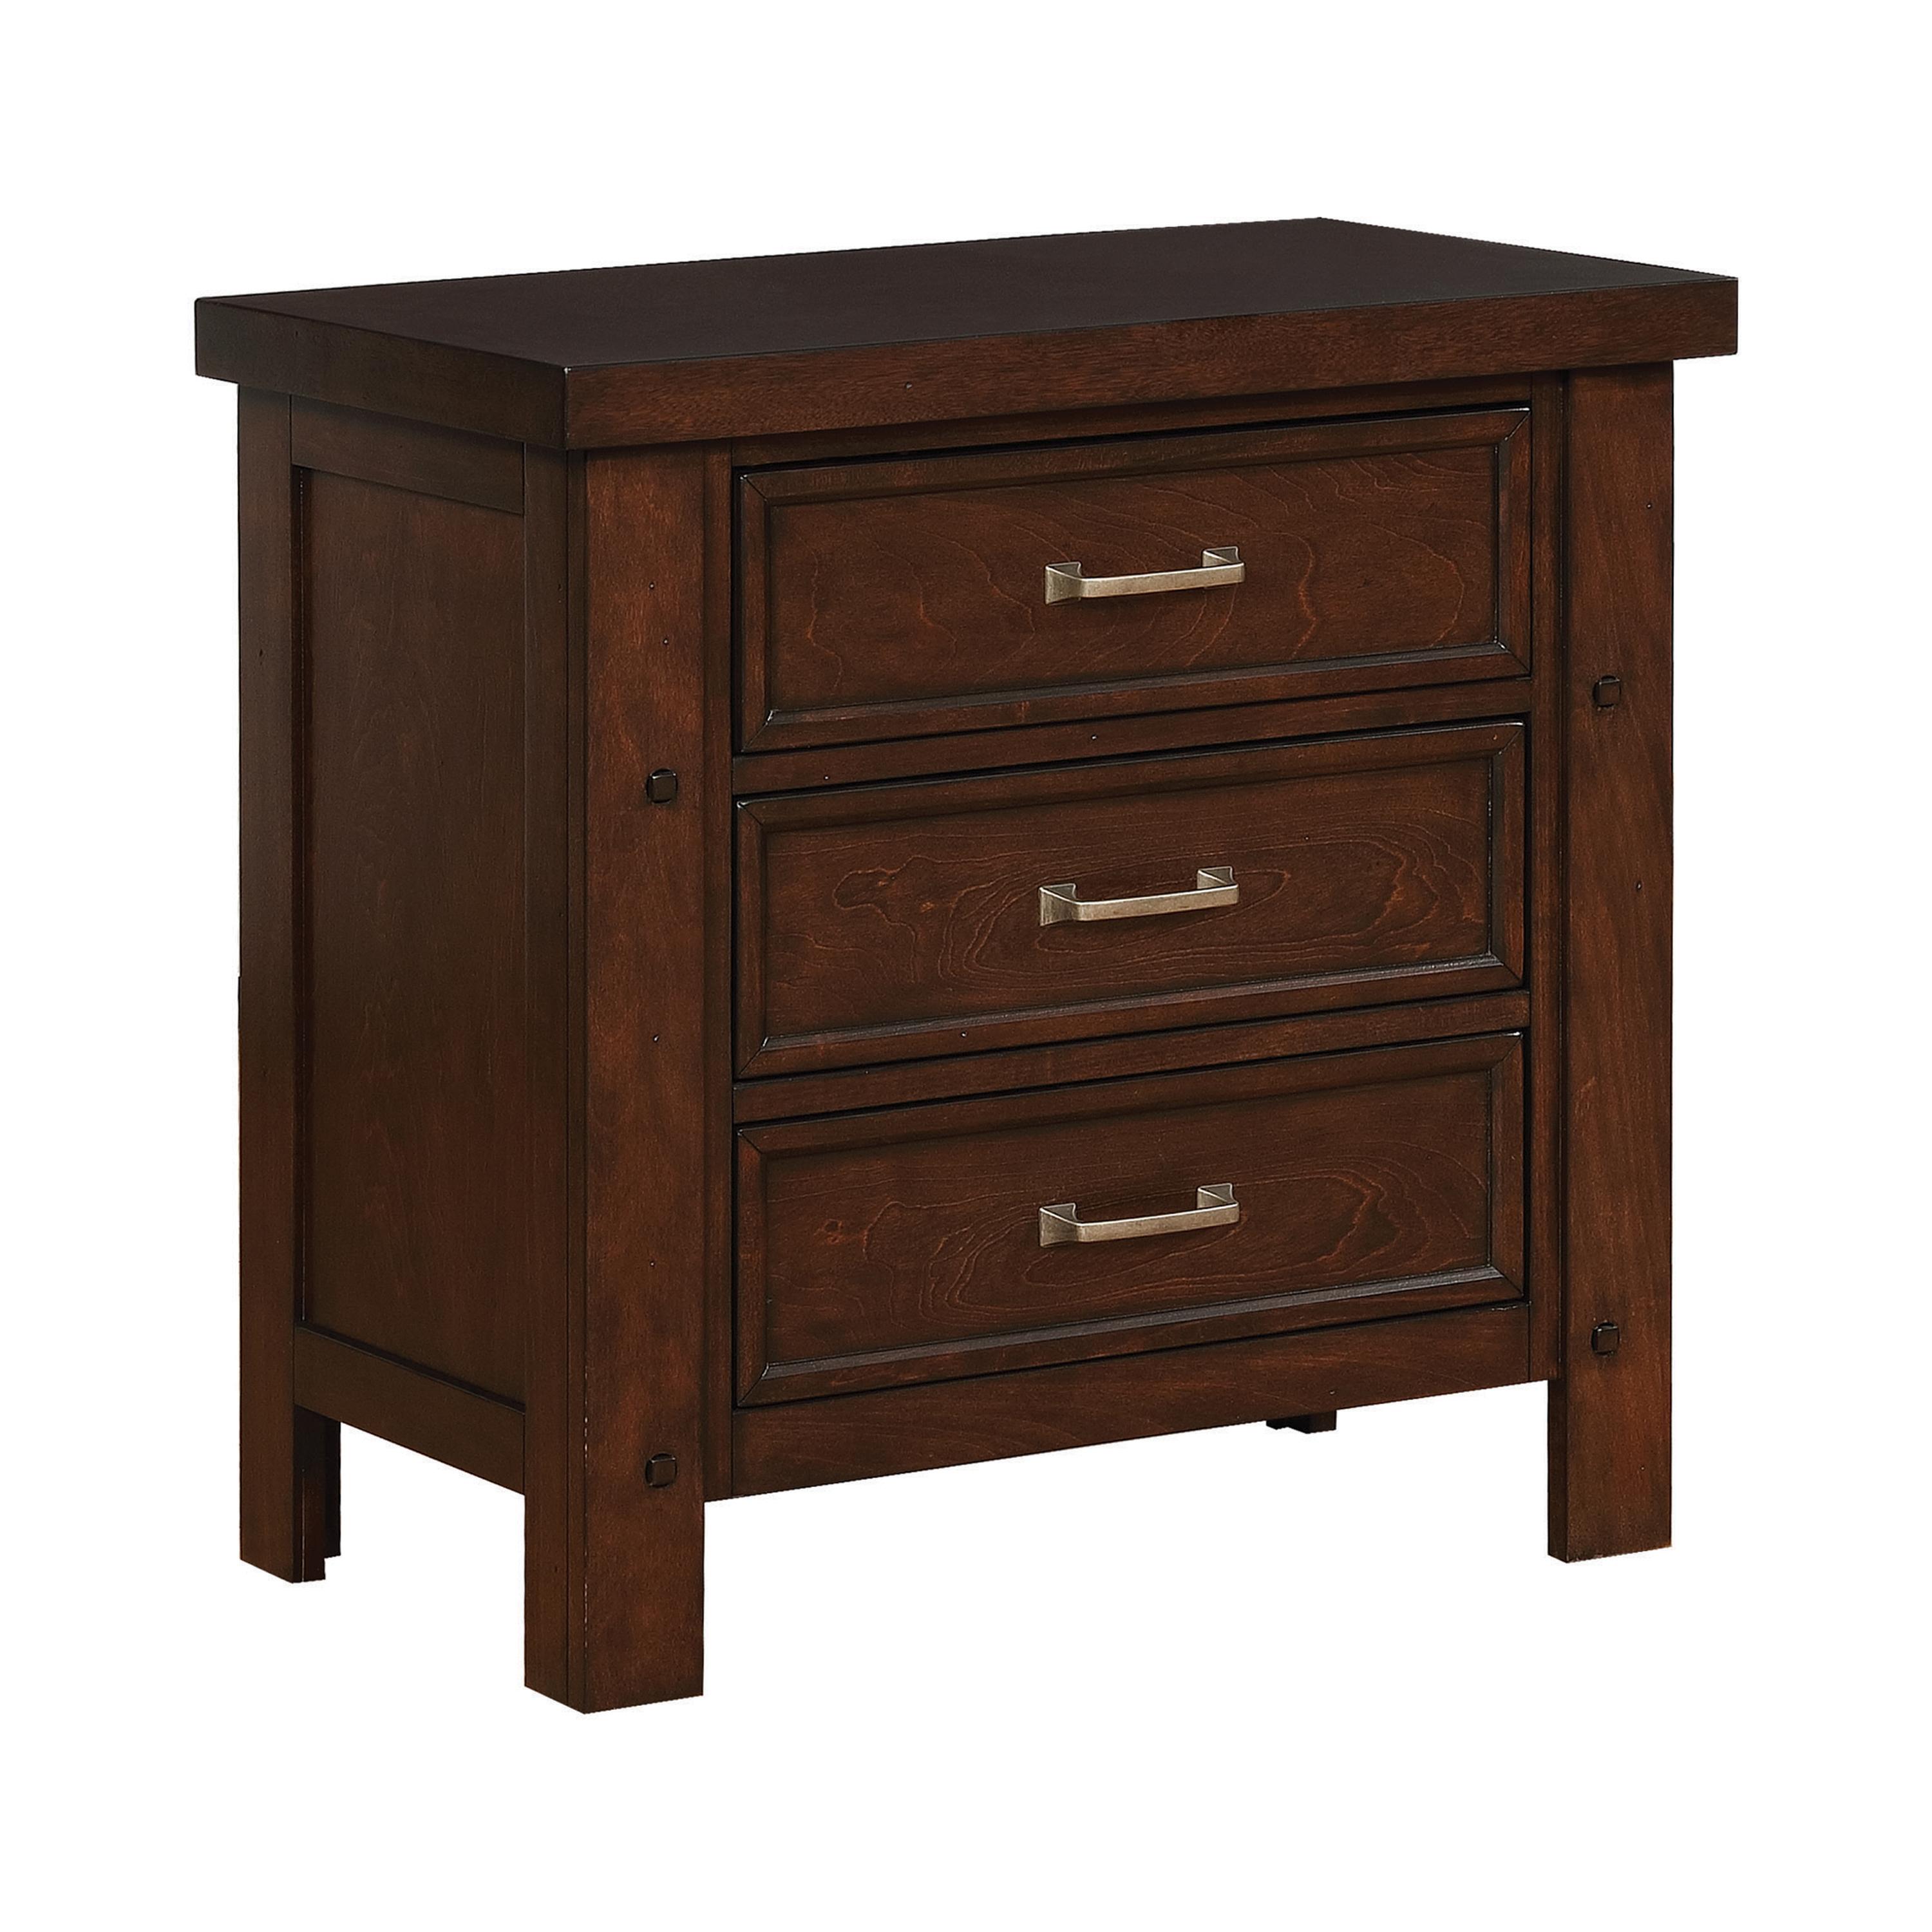 

    
Transitional Pinot Noir Solid Wood Nightstand Coaster 206432 Barstow
